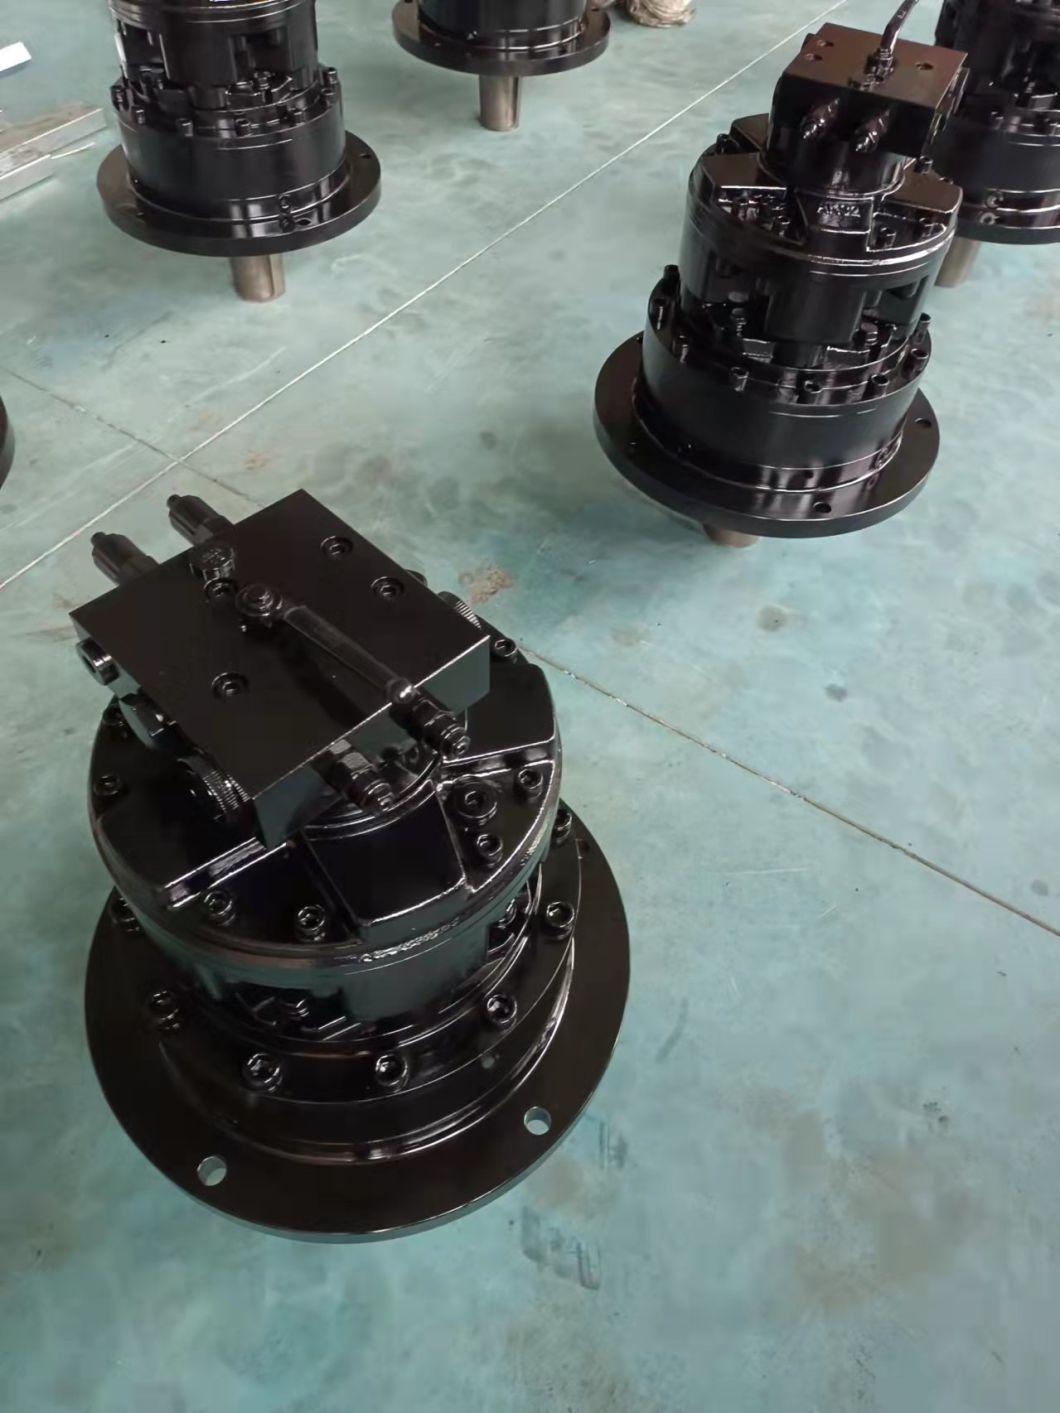 Replace Italy Sai GM2-2700 Radial Piston Rpm Inner Five Star Hydraulic Motor with Hydraulic Valve and Gear Reducer for Ship Door, Drilling Rig Use.